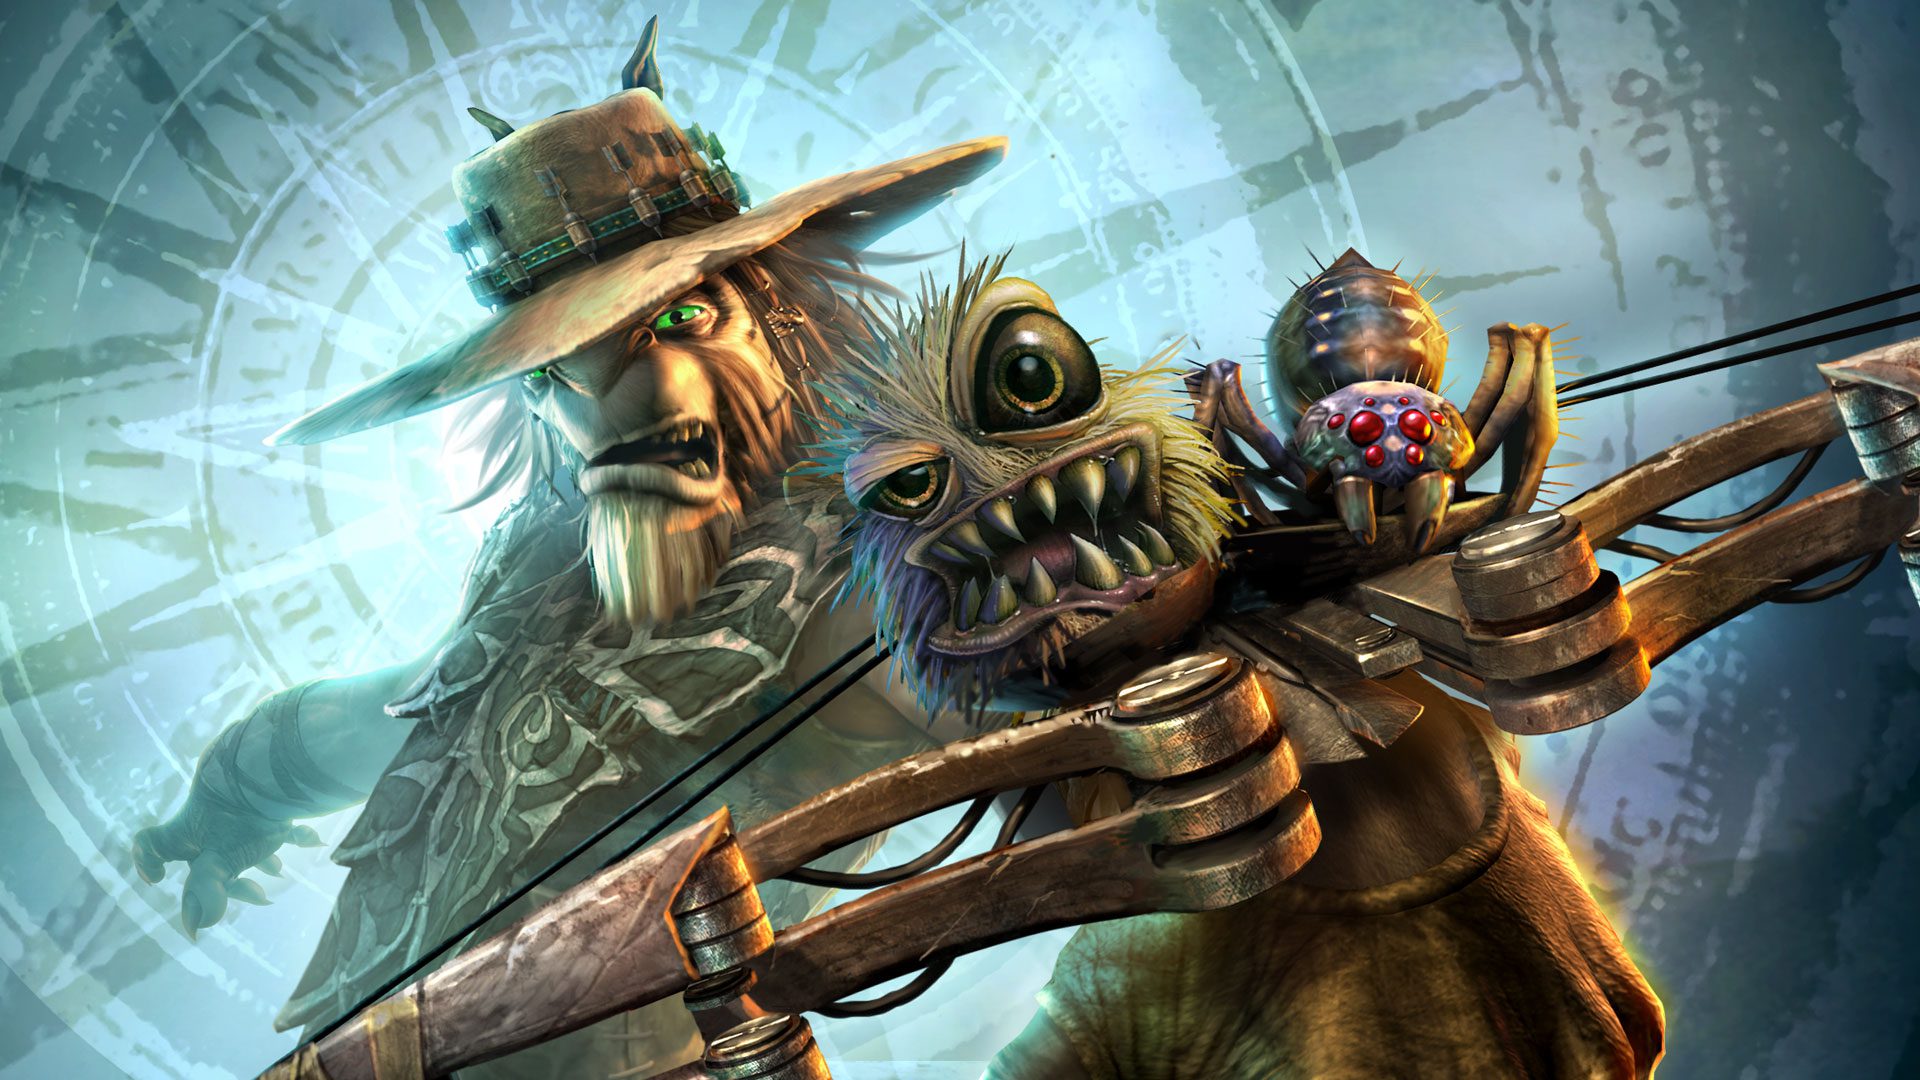 Oddworld: Strangers Wrath HD review: as unique in 2020 as it was in 2005